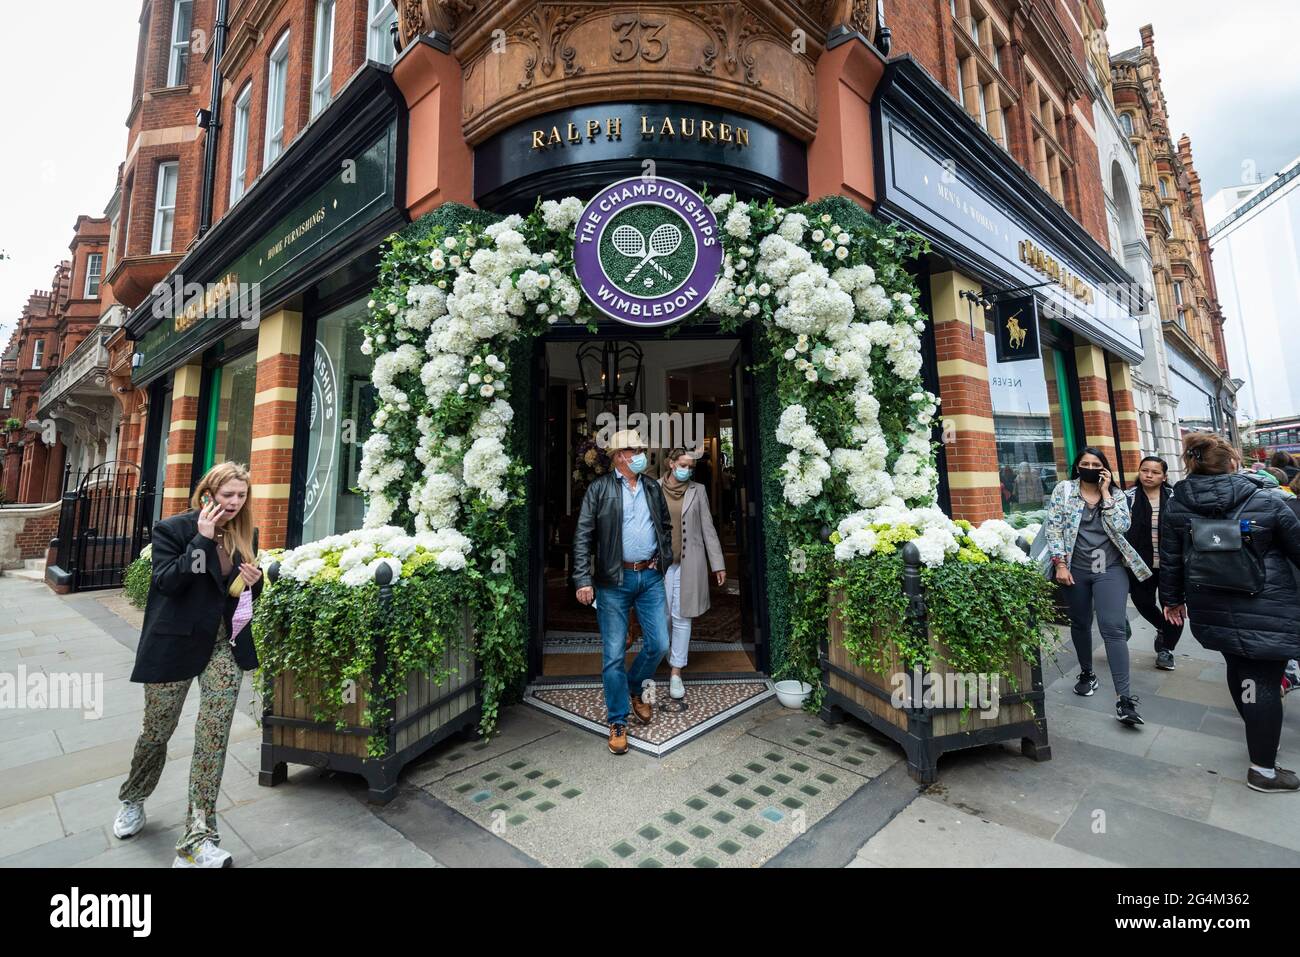 London, UK.  22 June 2021.  People pass the exterior of the Ralph Lauren store in Sloane Square, decorated ahead of this year’s upcoming Wimbledon tennis championships at the All England club. Ralph Lauren supplies outfits for officials at the event.  Lockdown restrictions will limit crowds, but the finals will be at full capacity when restrictions are relaxed.  Credit: Stephen Chung / Alamy Live News Stock Photo